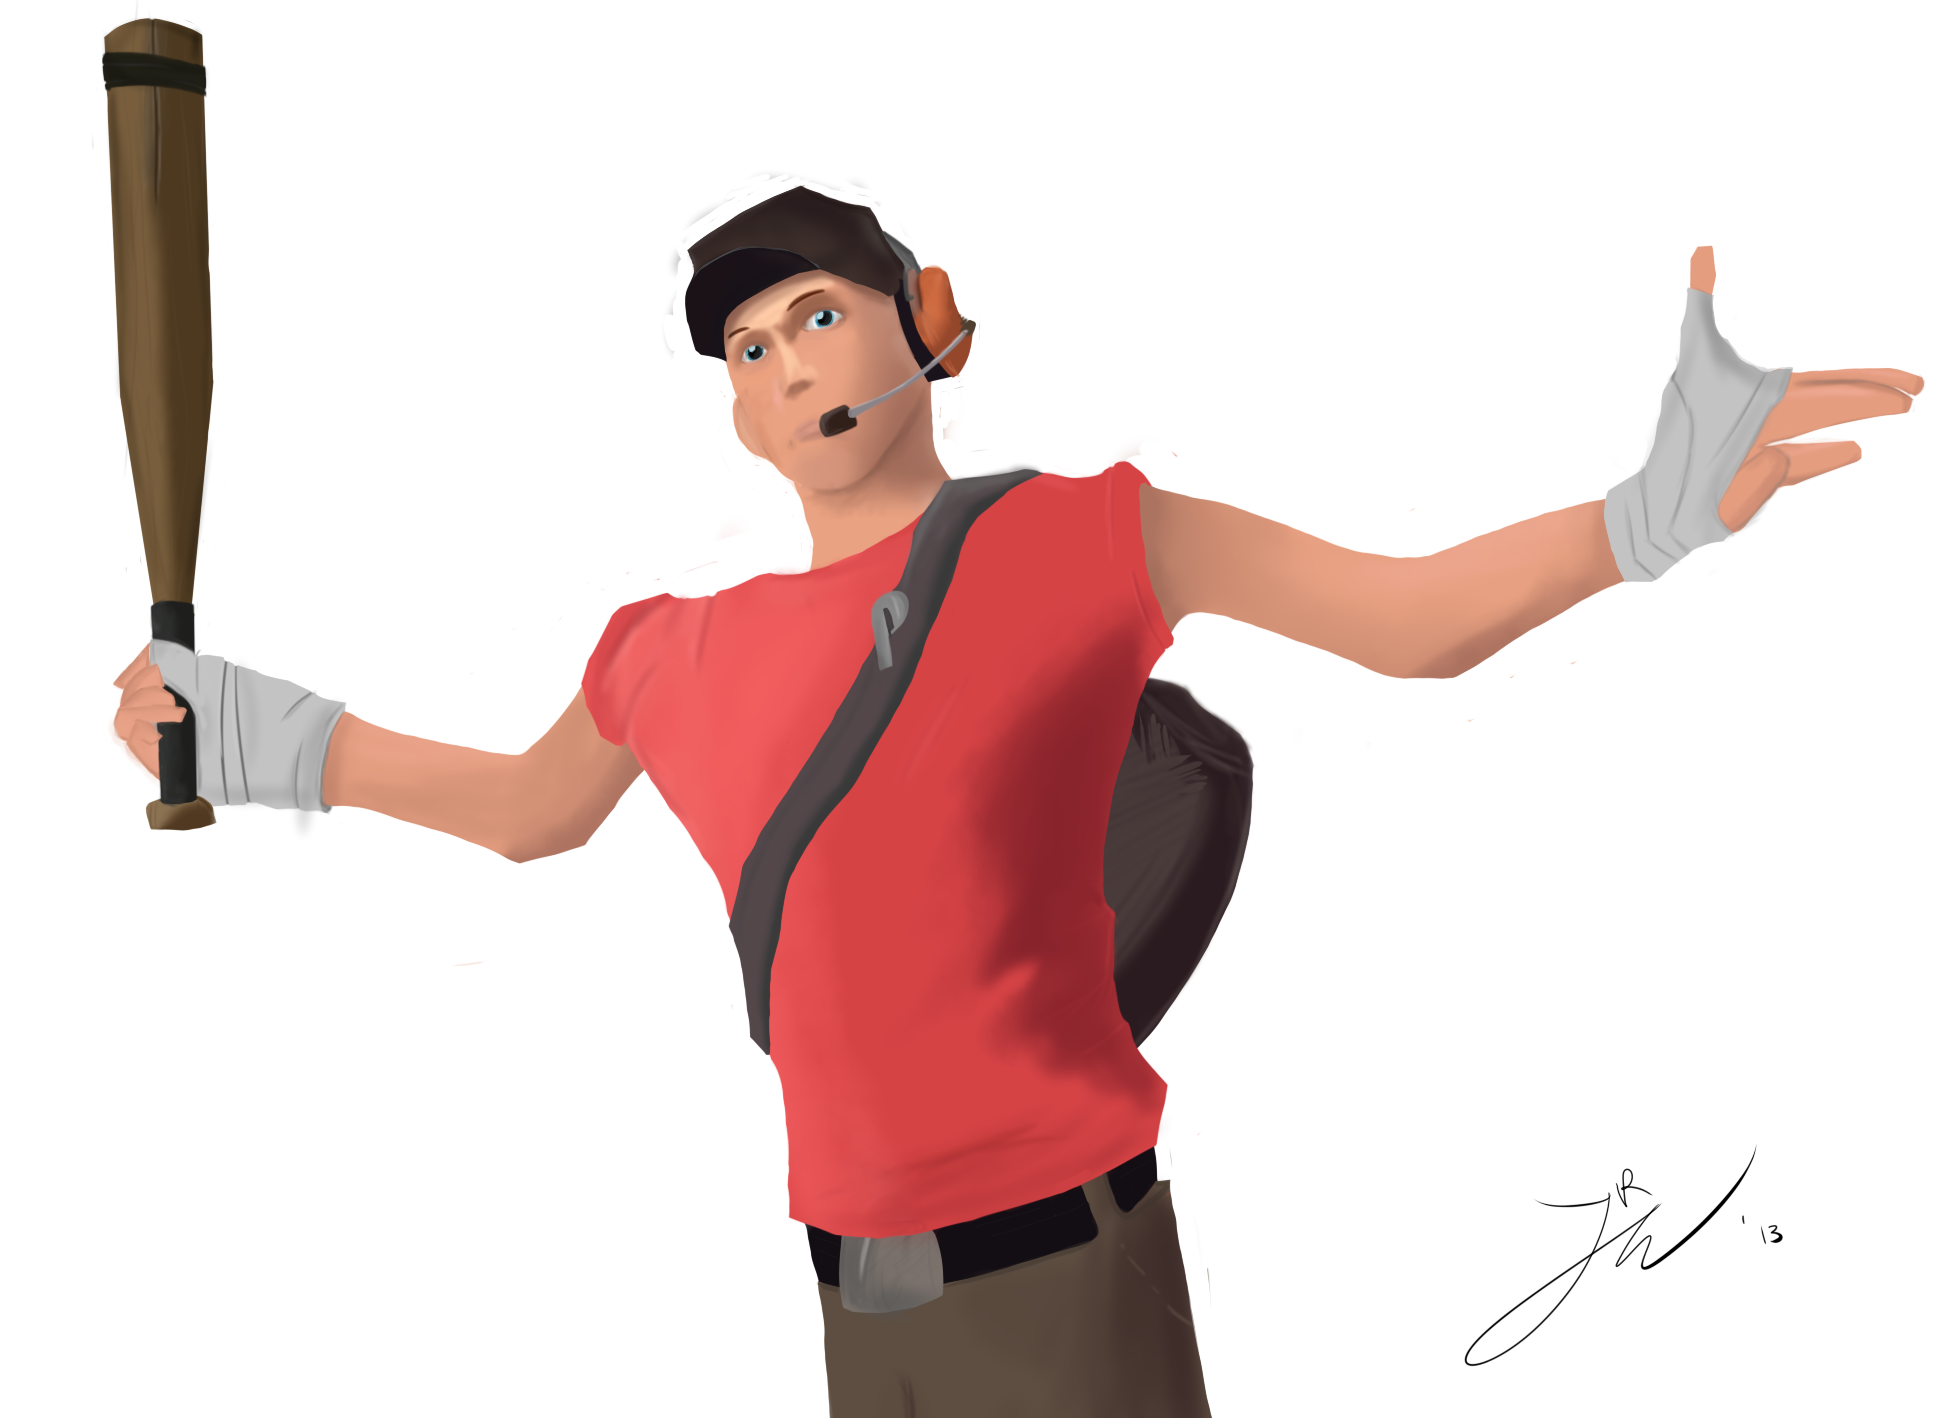 TF2 Scout painting! 